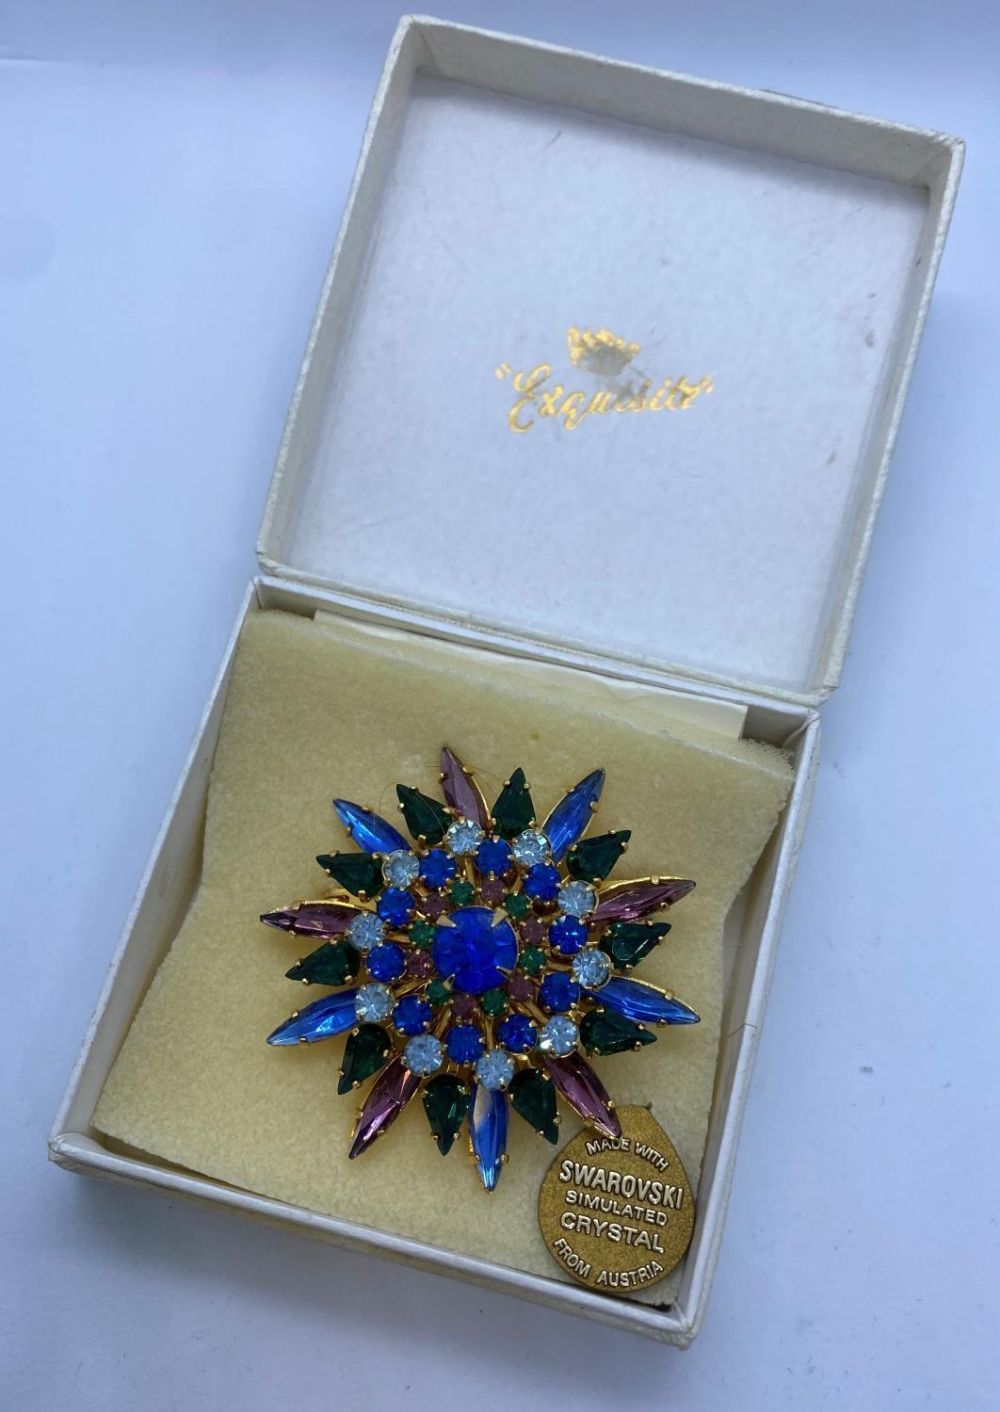 Swarovski Brooch with Coloured Stones and Labelled 'Marine' 5x5cm approx. - Image 2 of 3